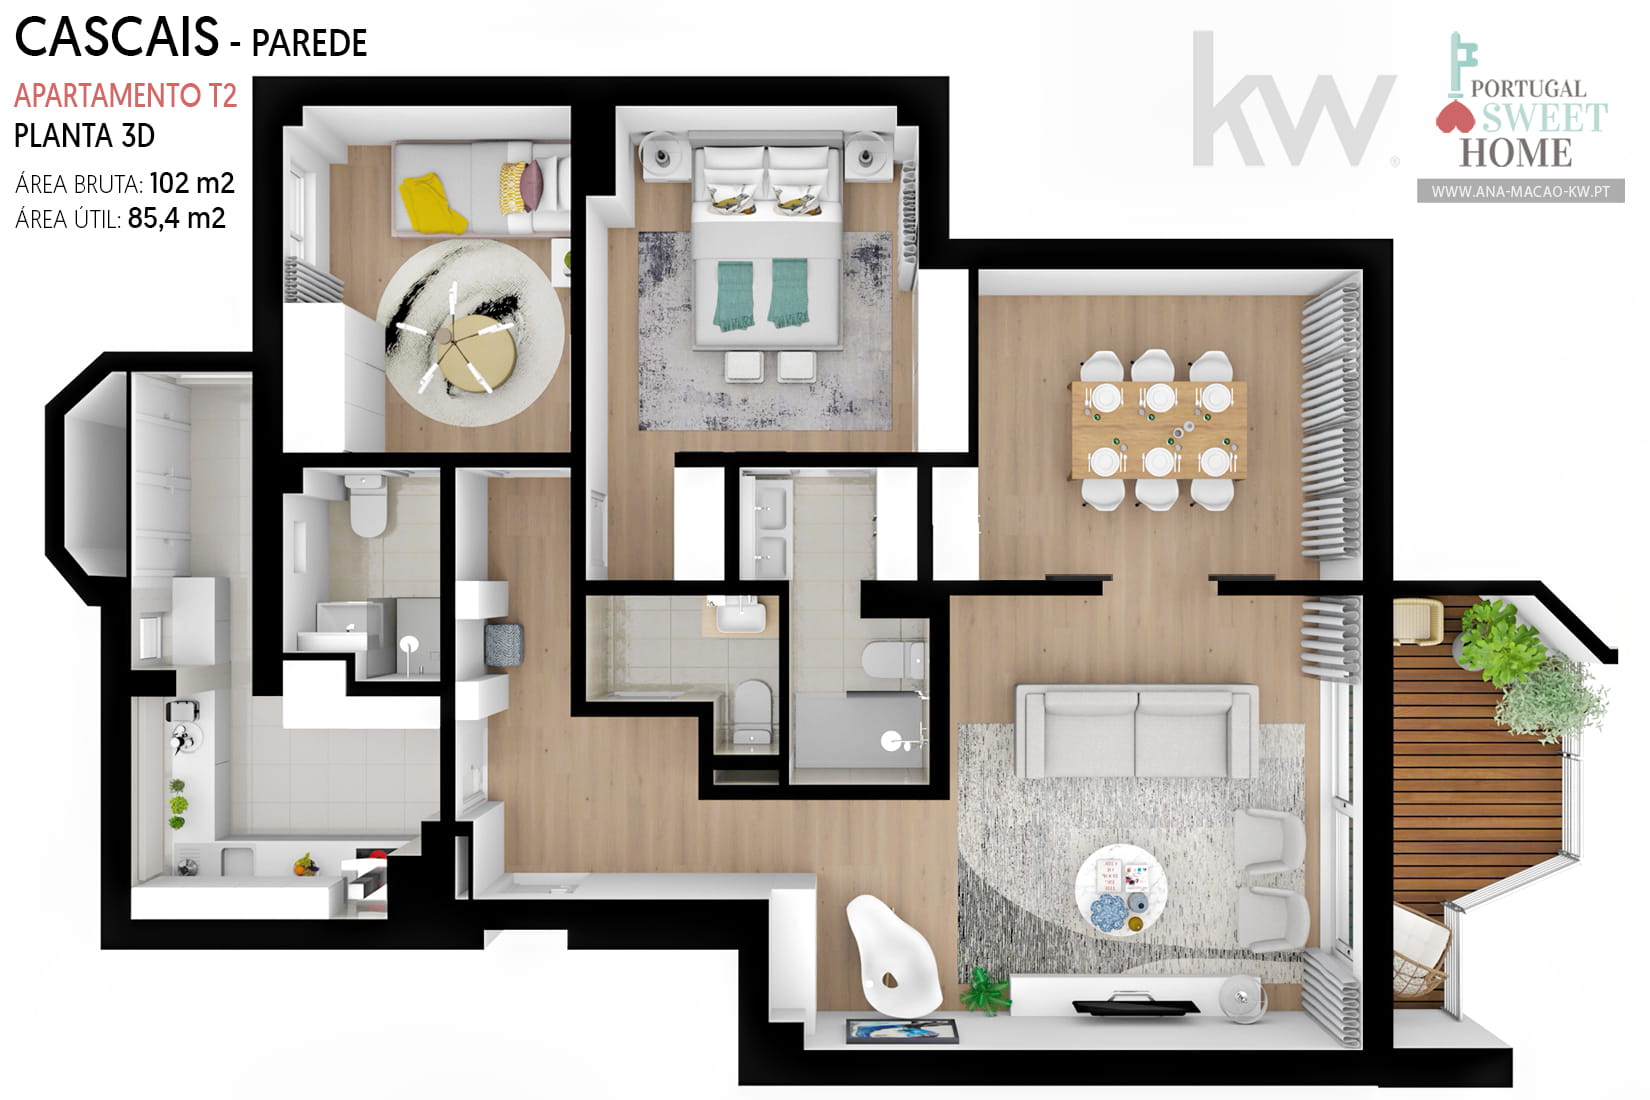 3D Plan of the Apartment